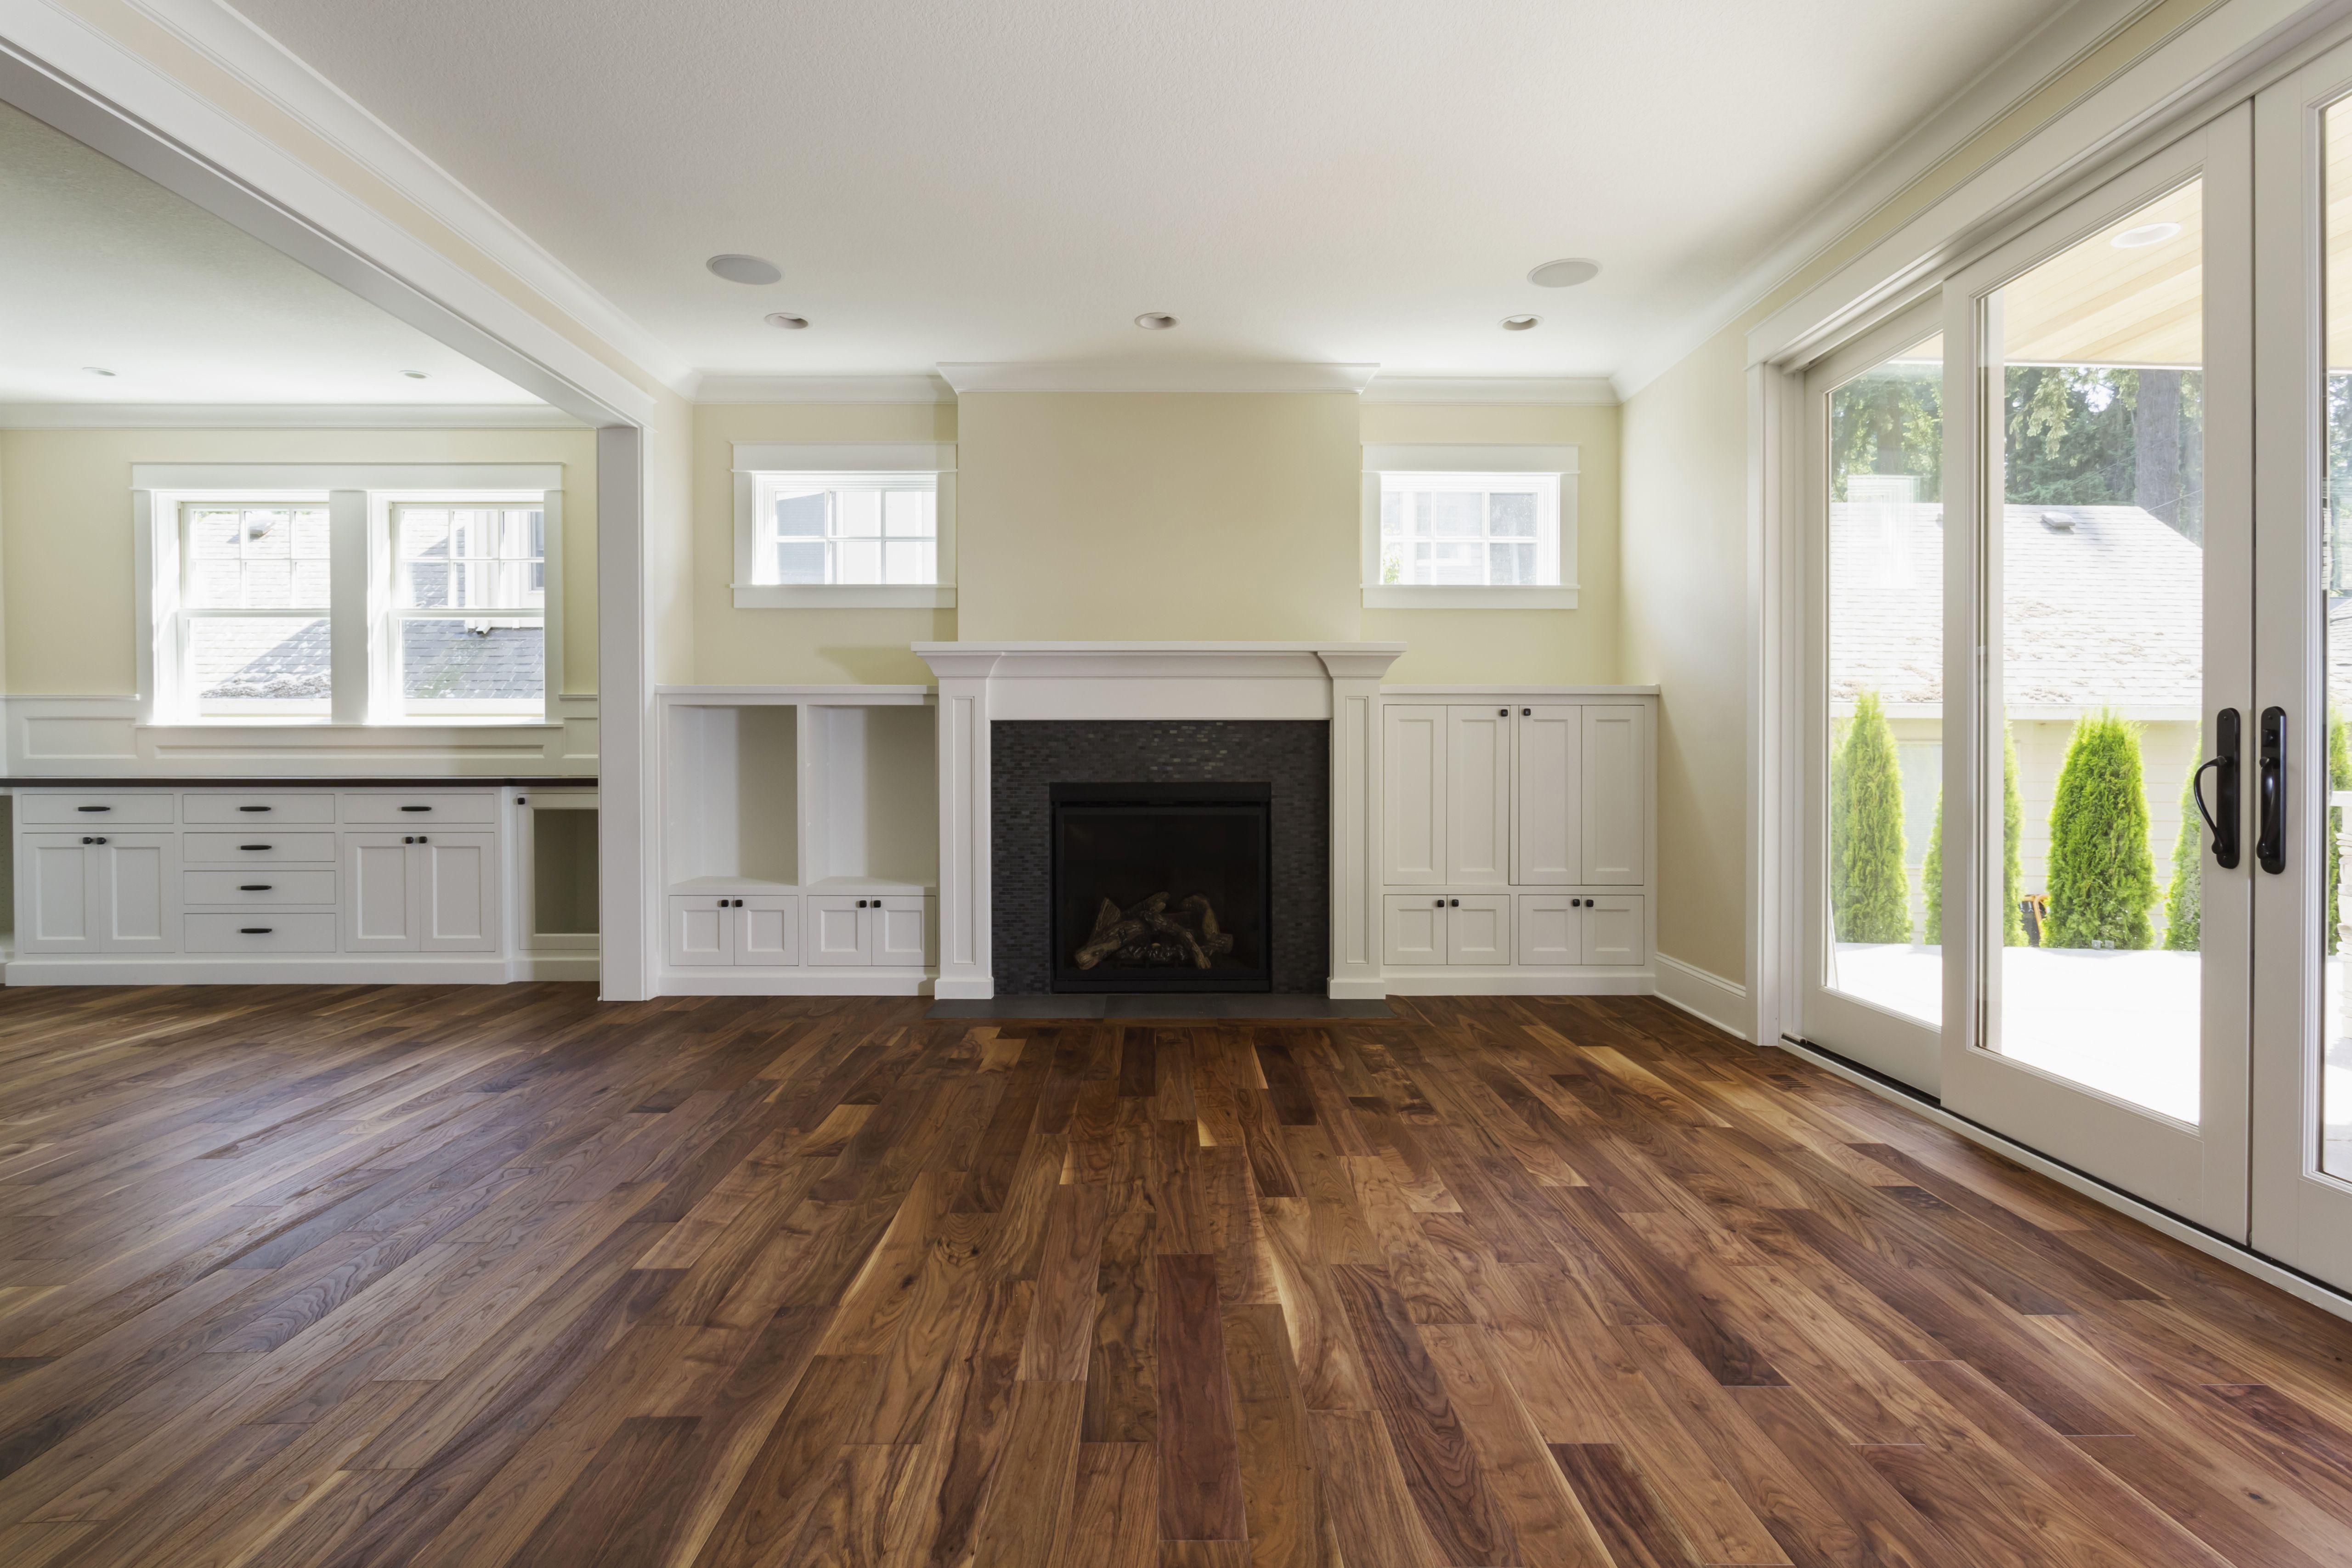 22 Cute Re Sanding Hardwood Floors 2024 free download re sanding hardwood floors of the pros and cons of prefinished hardwood flooring throughout fireplace and built in shelves in living room 482143011 57bef8e33df78cc16e035397